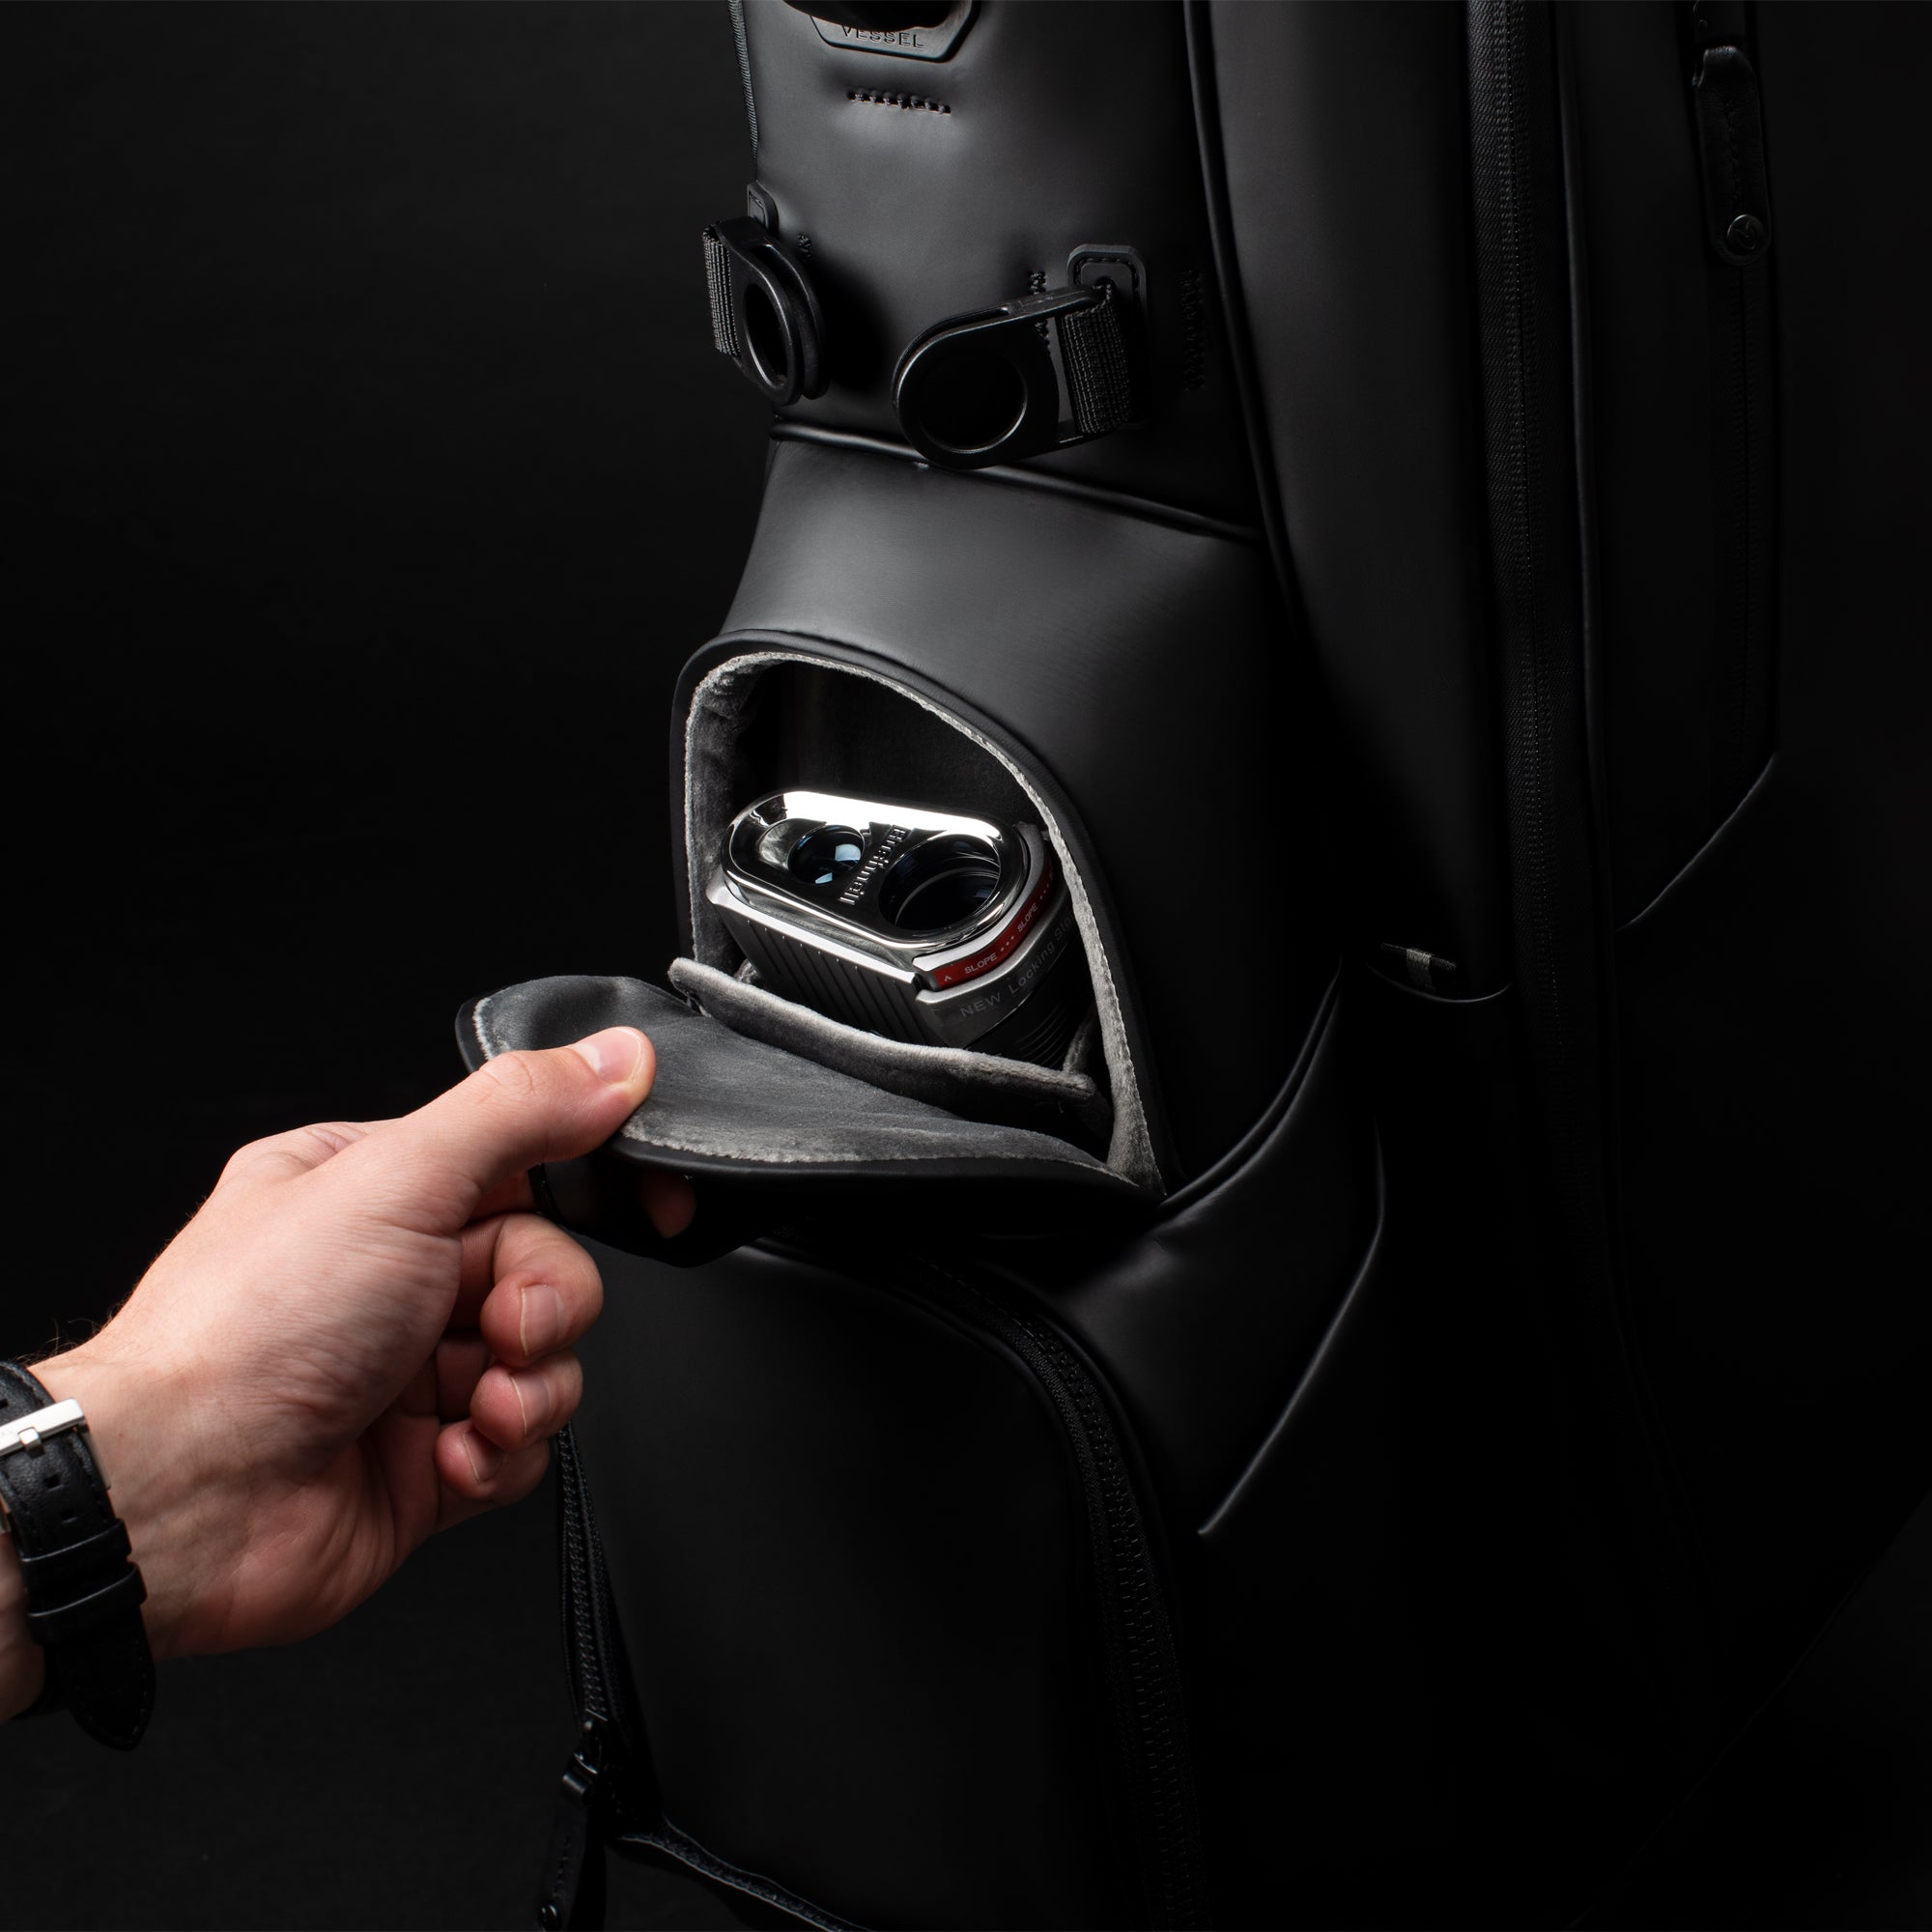 Close up image of a hand opening the magnetic pocket on a black golf bag in a black studio